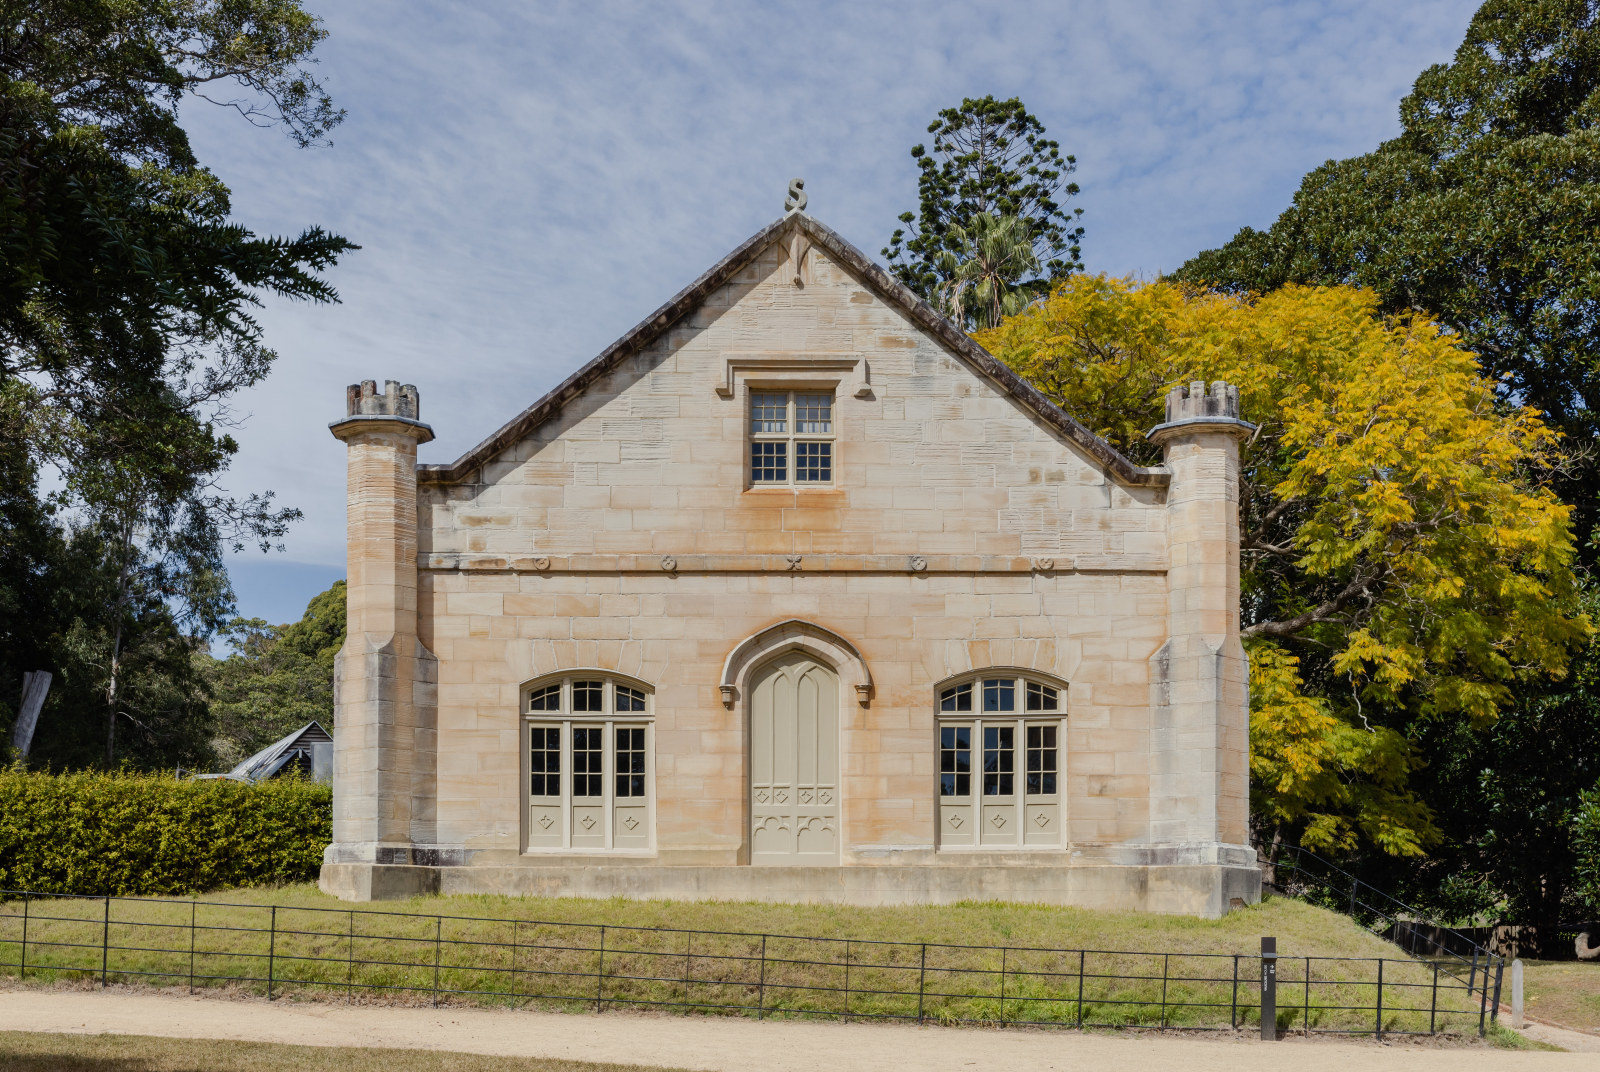 Exterior of Stables at Vaucluse House